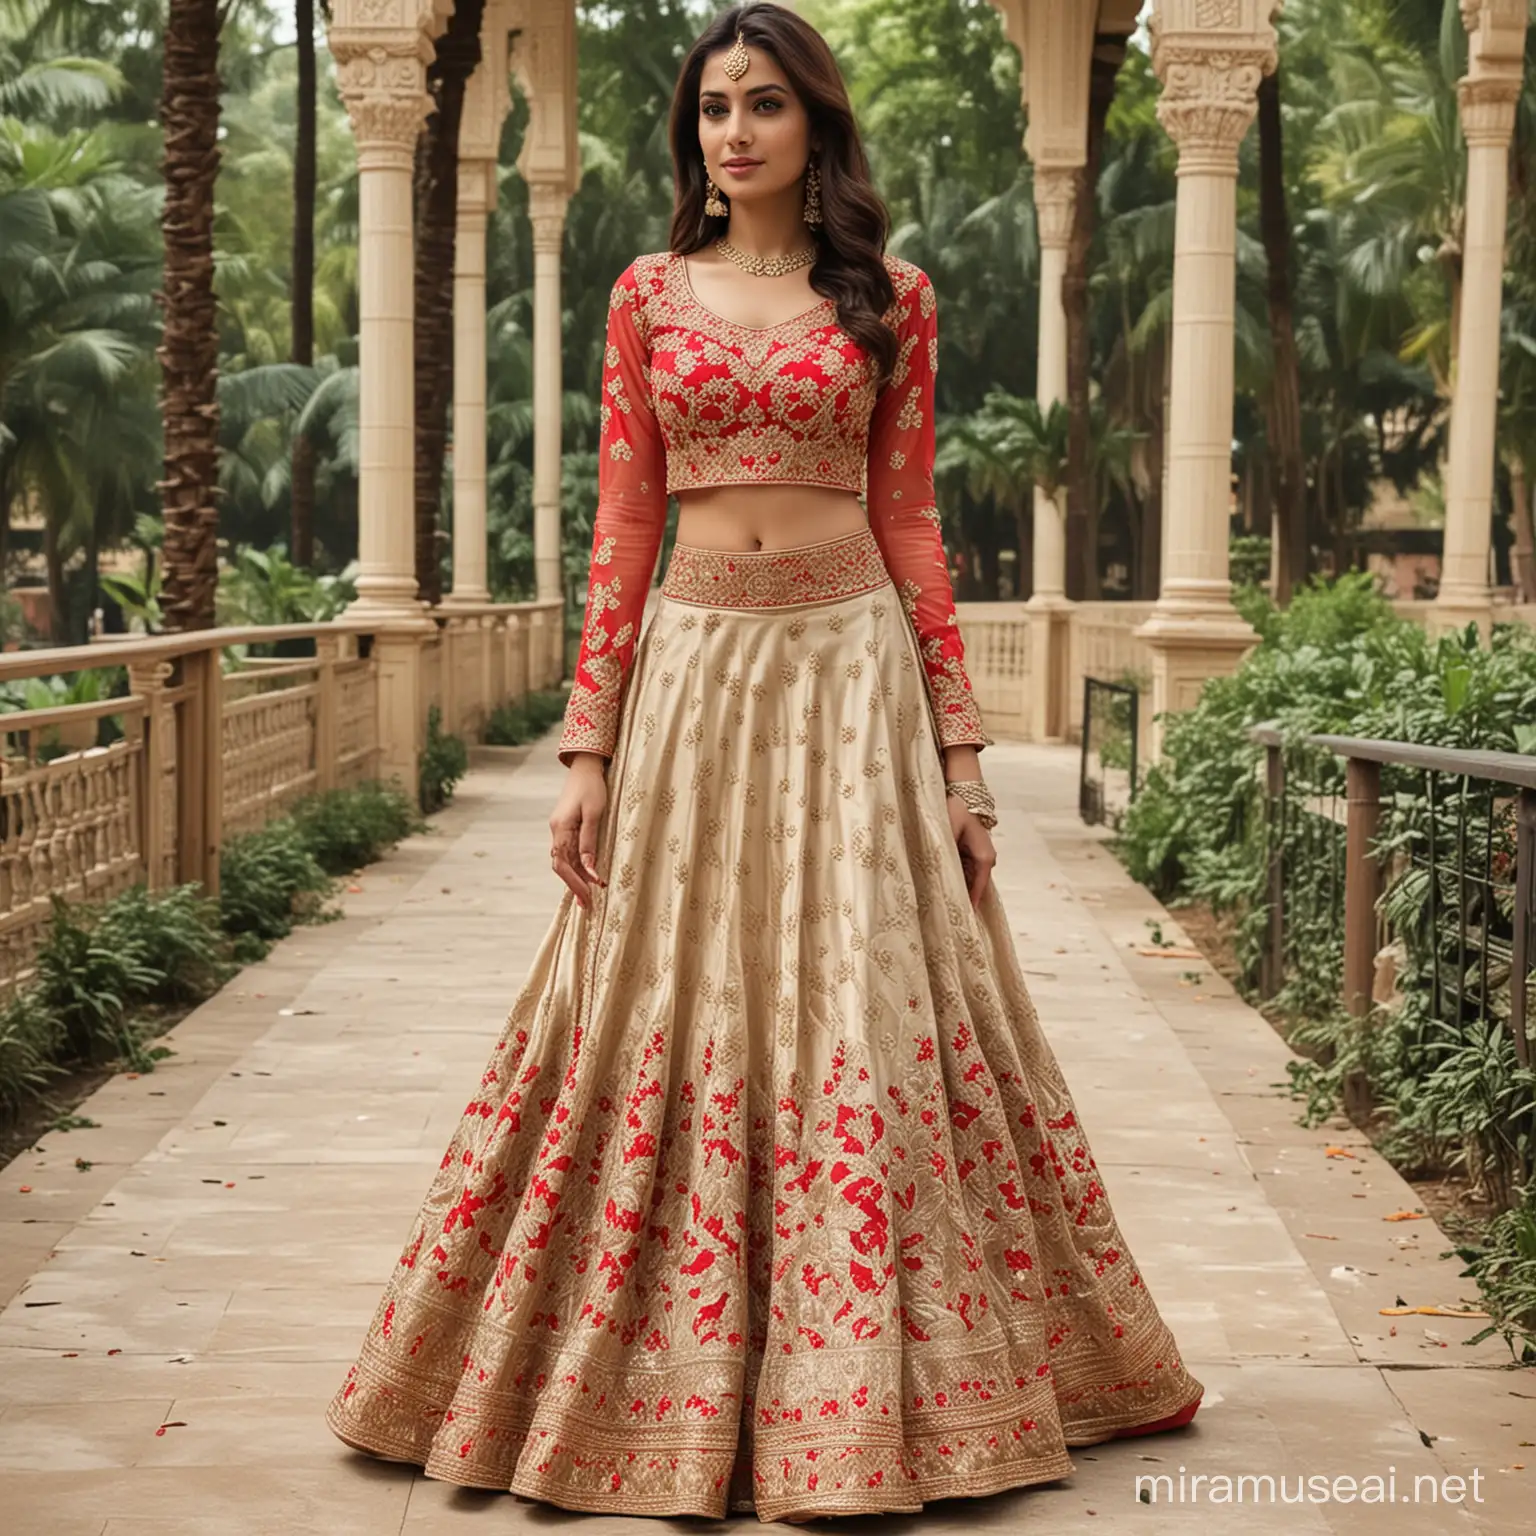 Indian lehenga skirts with western style blouse for brides